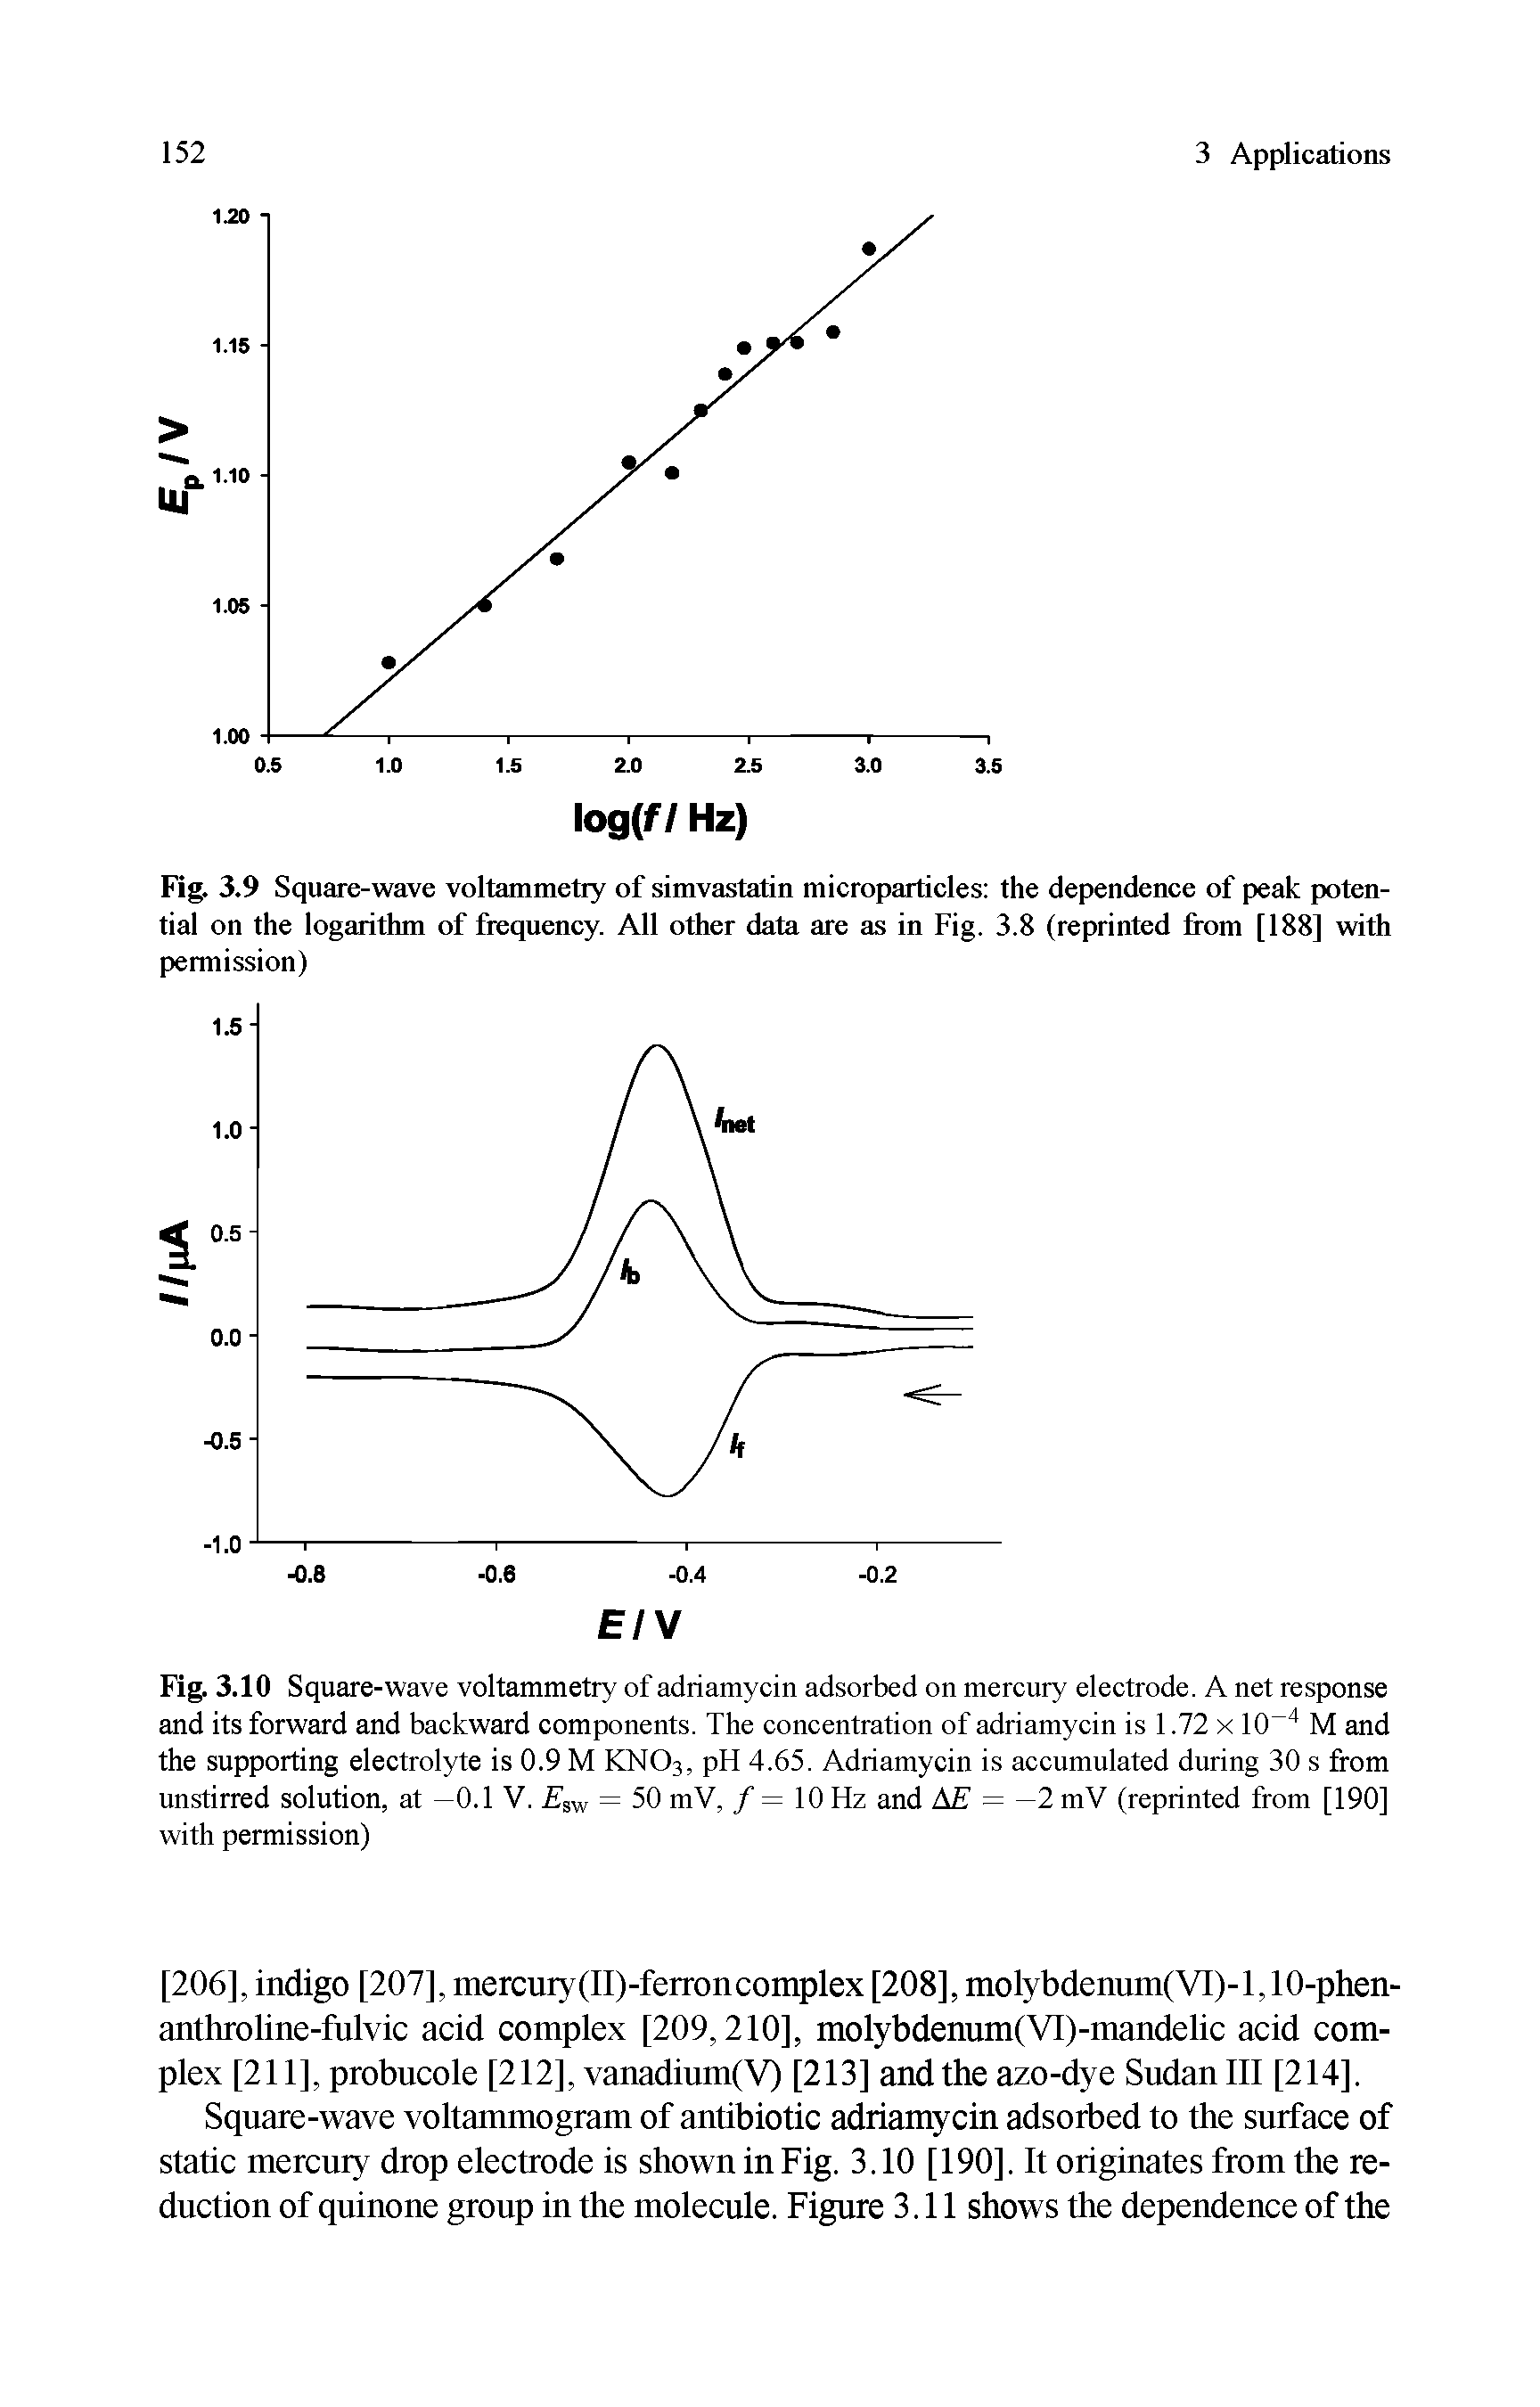 Fig. 3.9 Square-wave voltammetry of simvastatin microparticles the dependence of peak potential on the logarithm of frequency. All other data are as in Fig. 3.8 (reprinted from [188] with permission)...